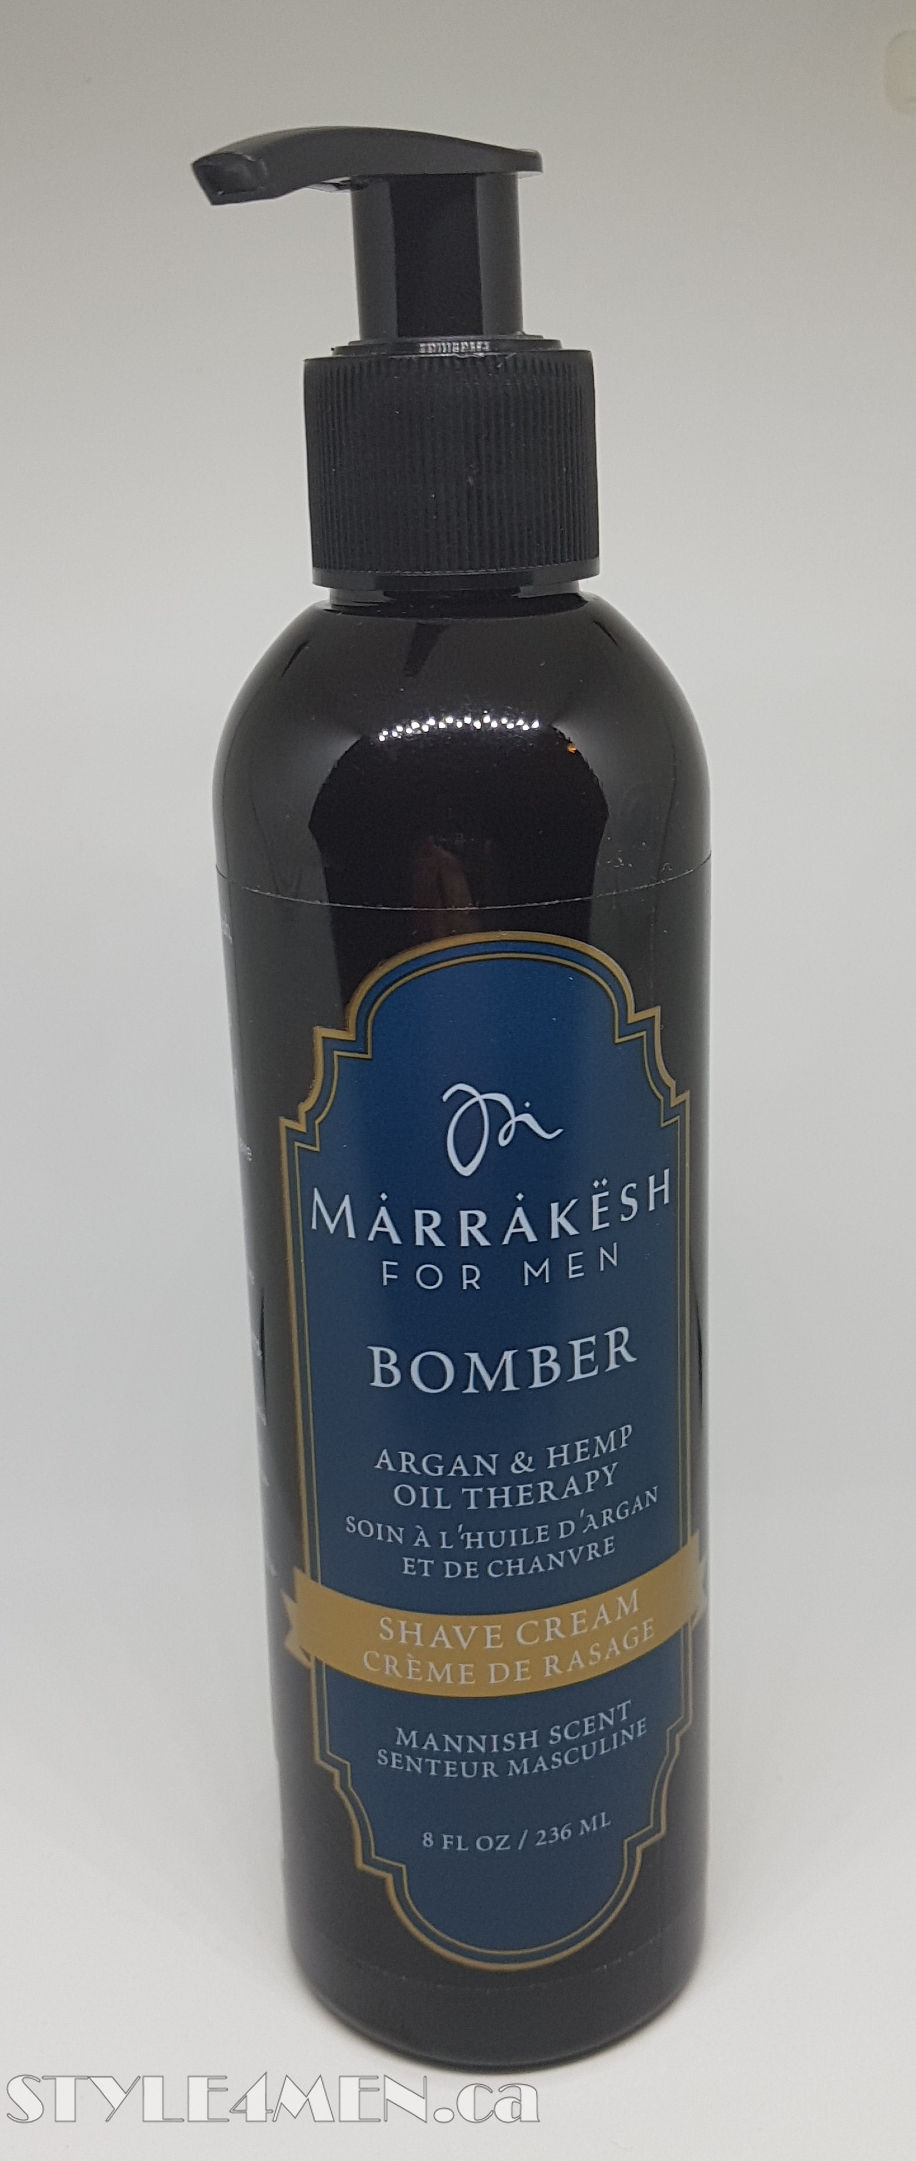 MARRAKESH Bomber Shave Cream – Amazing lubrication without the oily residue